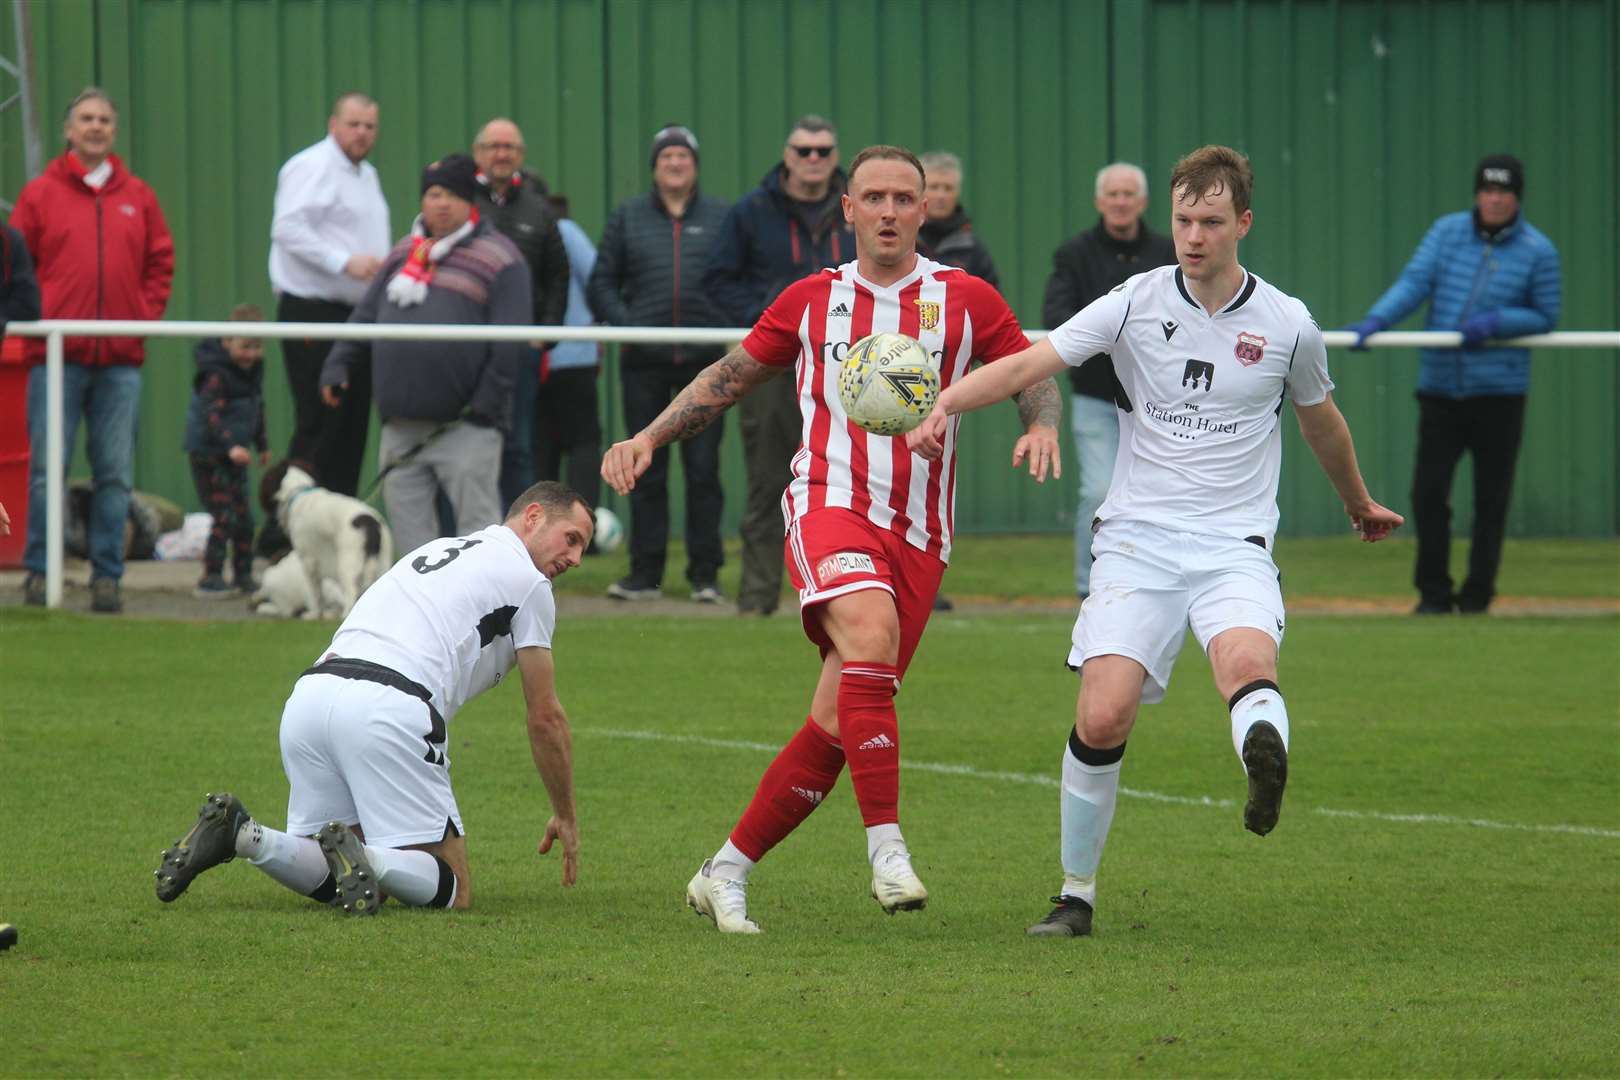 Formartine United's Jonny Smith scored the opening goal. Picture: Kyle Ritchie